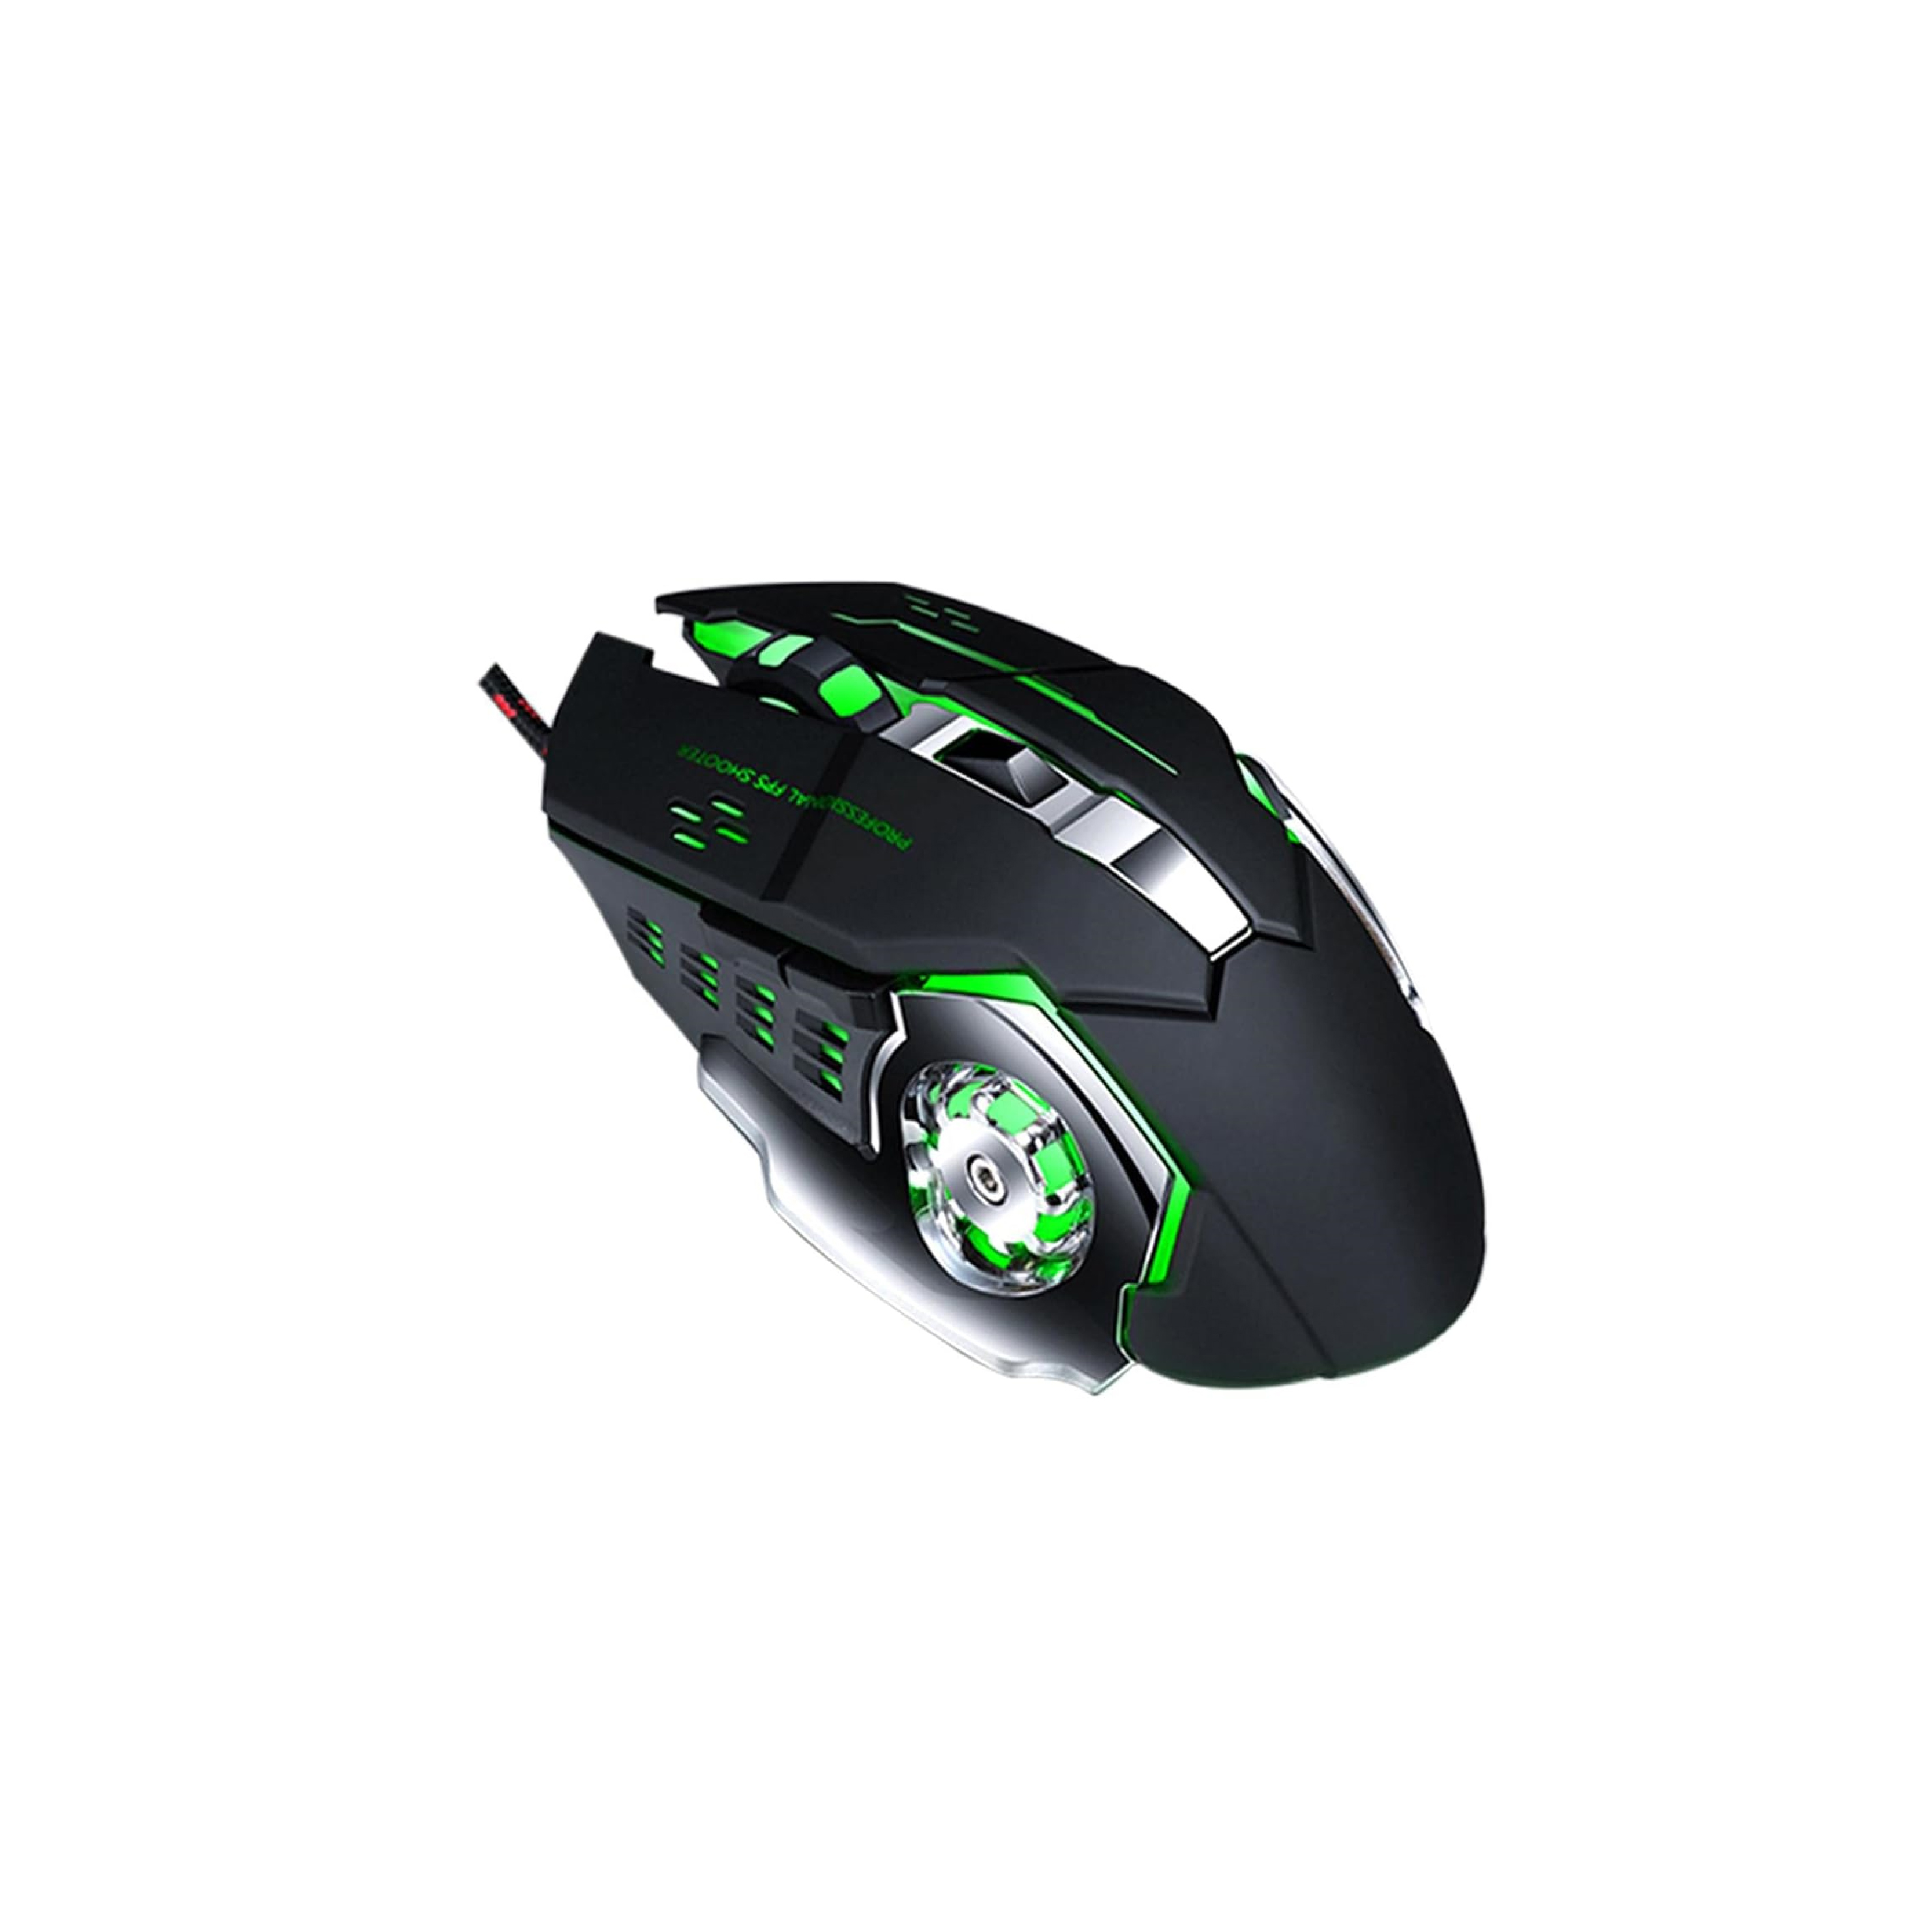 GAMING MOUSE MS12 PATOO 5 BUTTONS USB ,Mouse